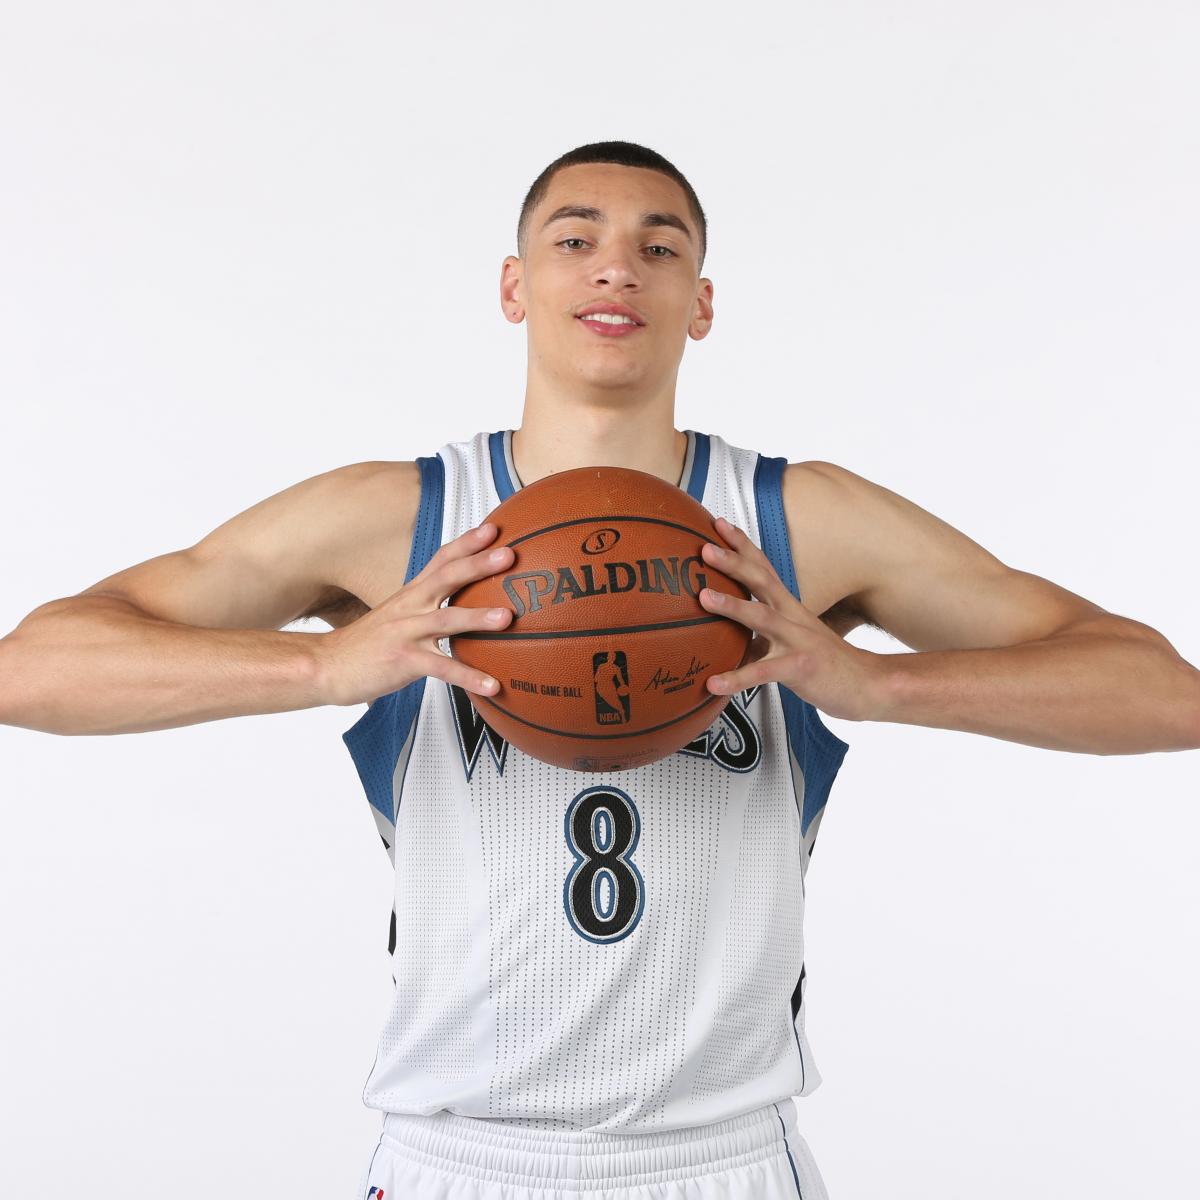 Thanks to Zach LaVine's scoring ability, the future looks bright for  Bothell hoops - ESPN - ESPNHS Washington- ESPN